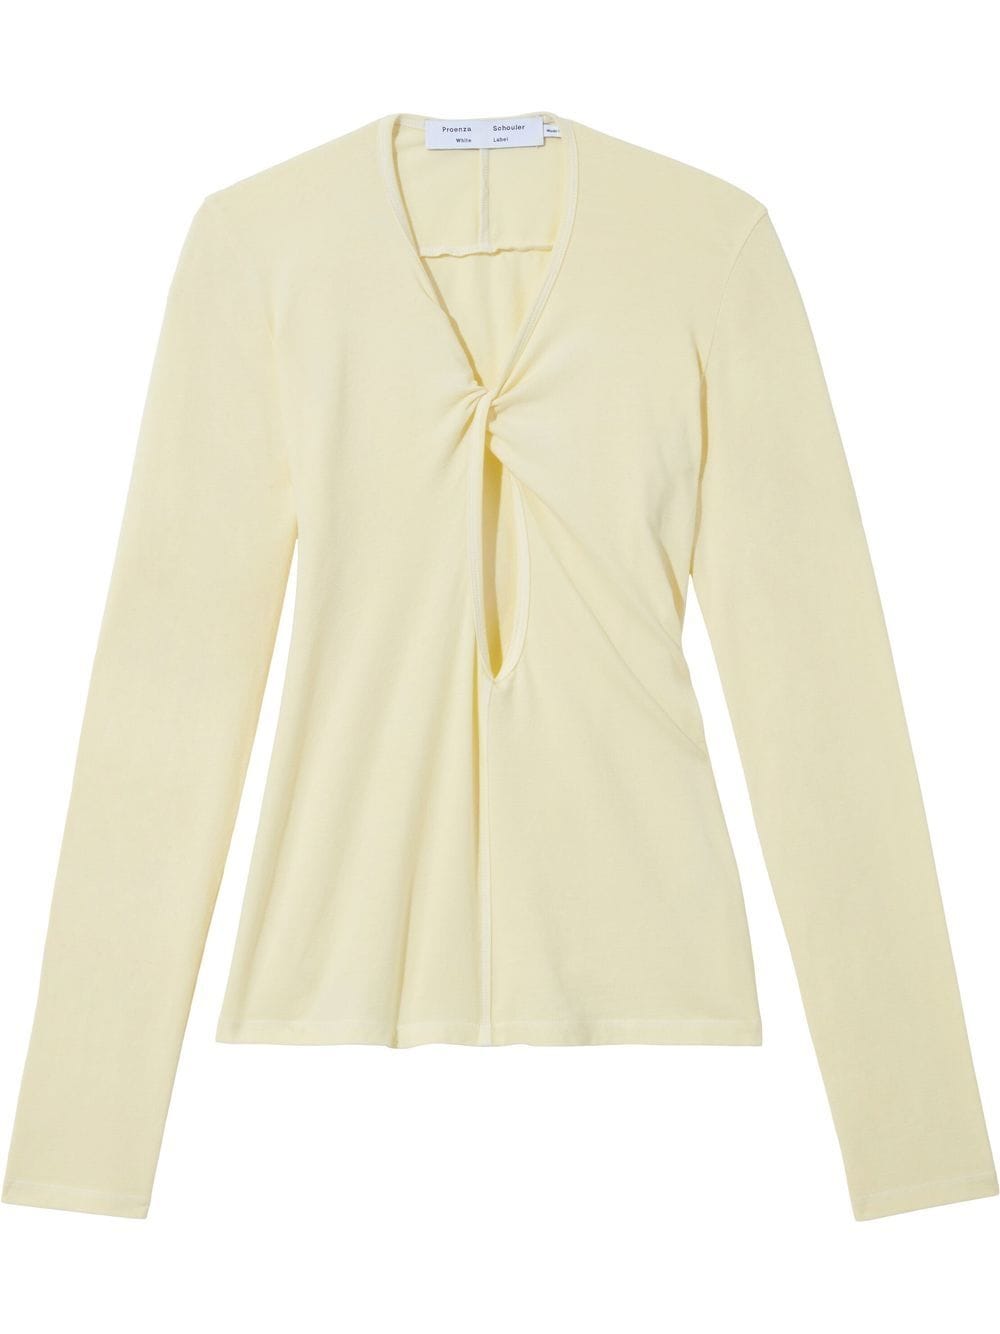 Proenza Schouler White Label twisted long-sleeve T-shirt - Yellow von Proenza Schouler White Label